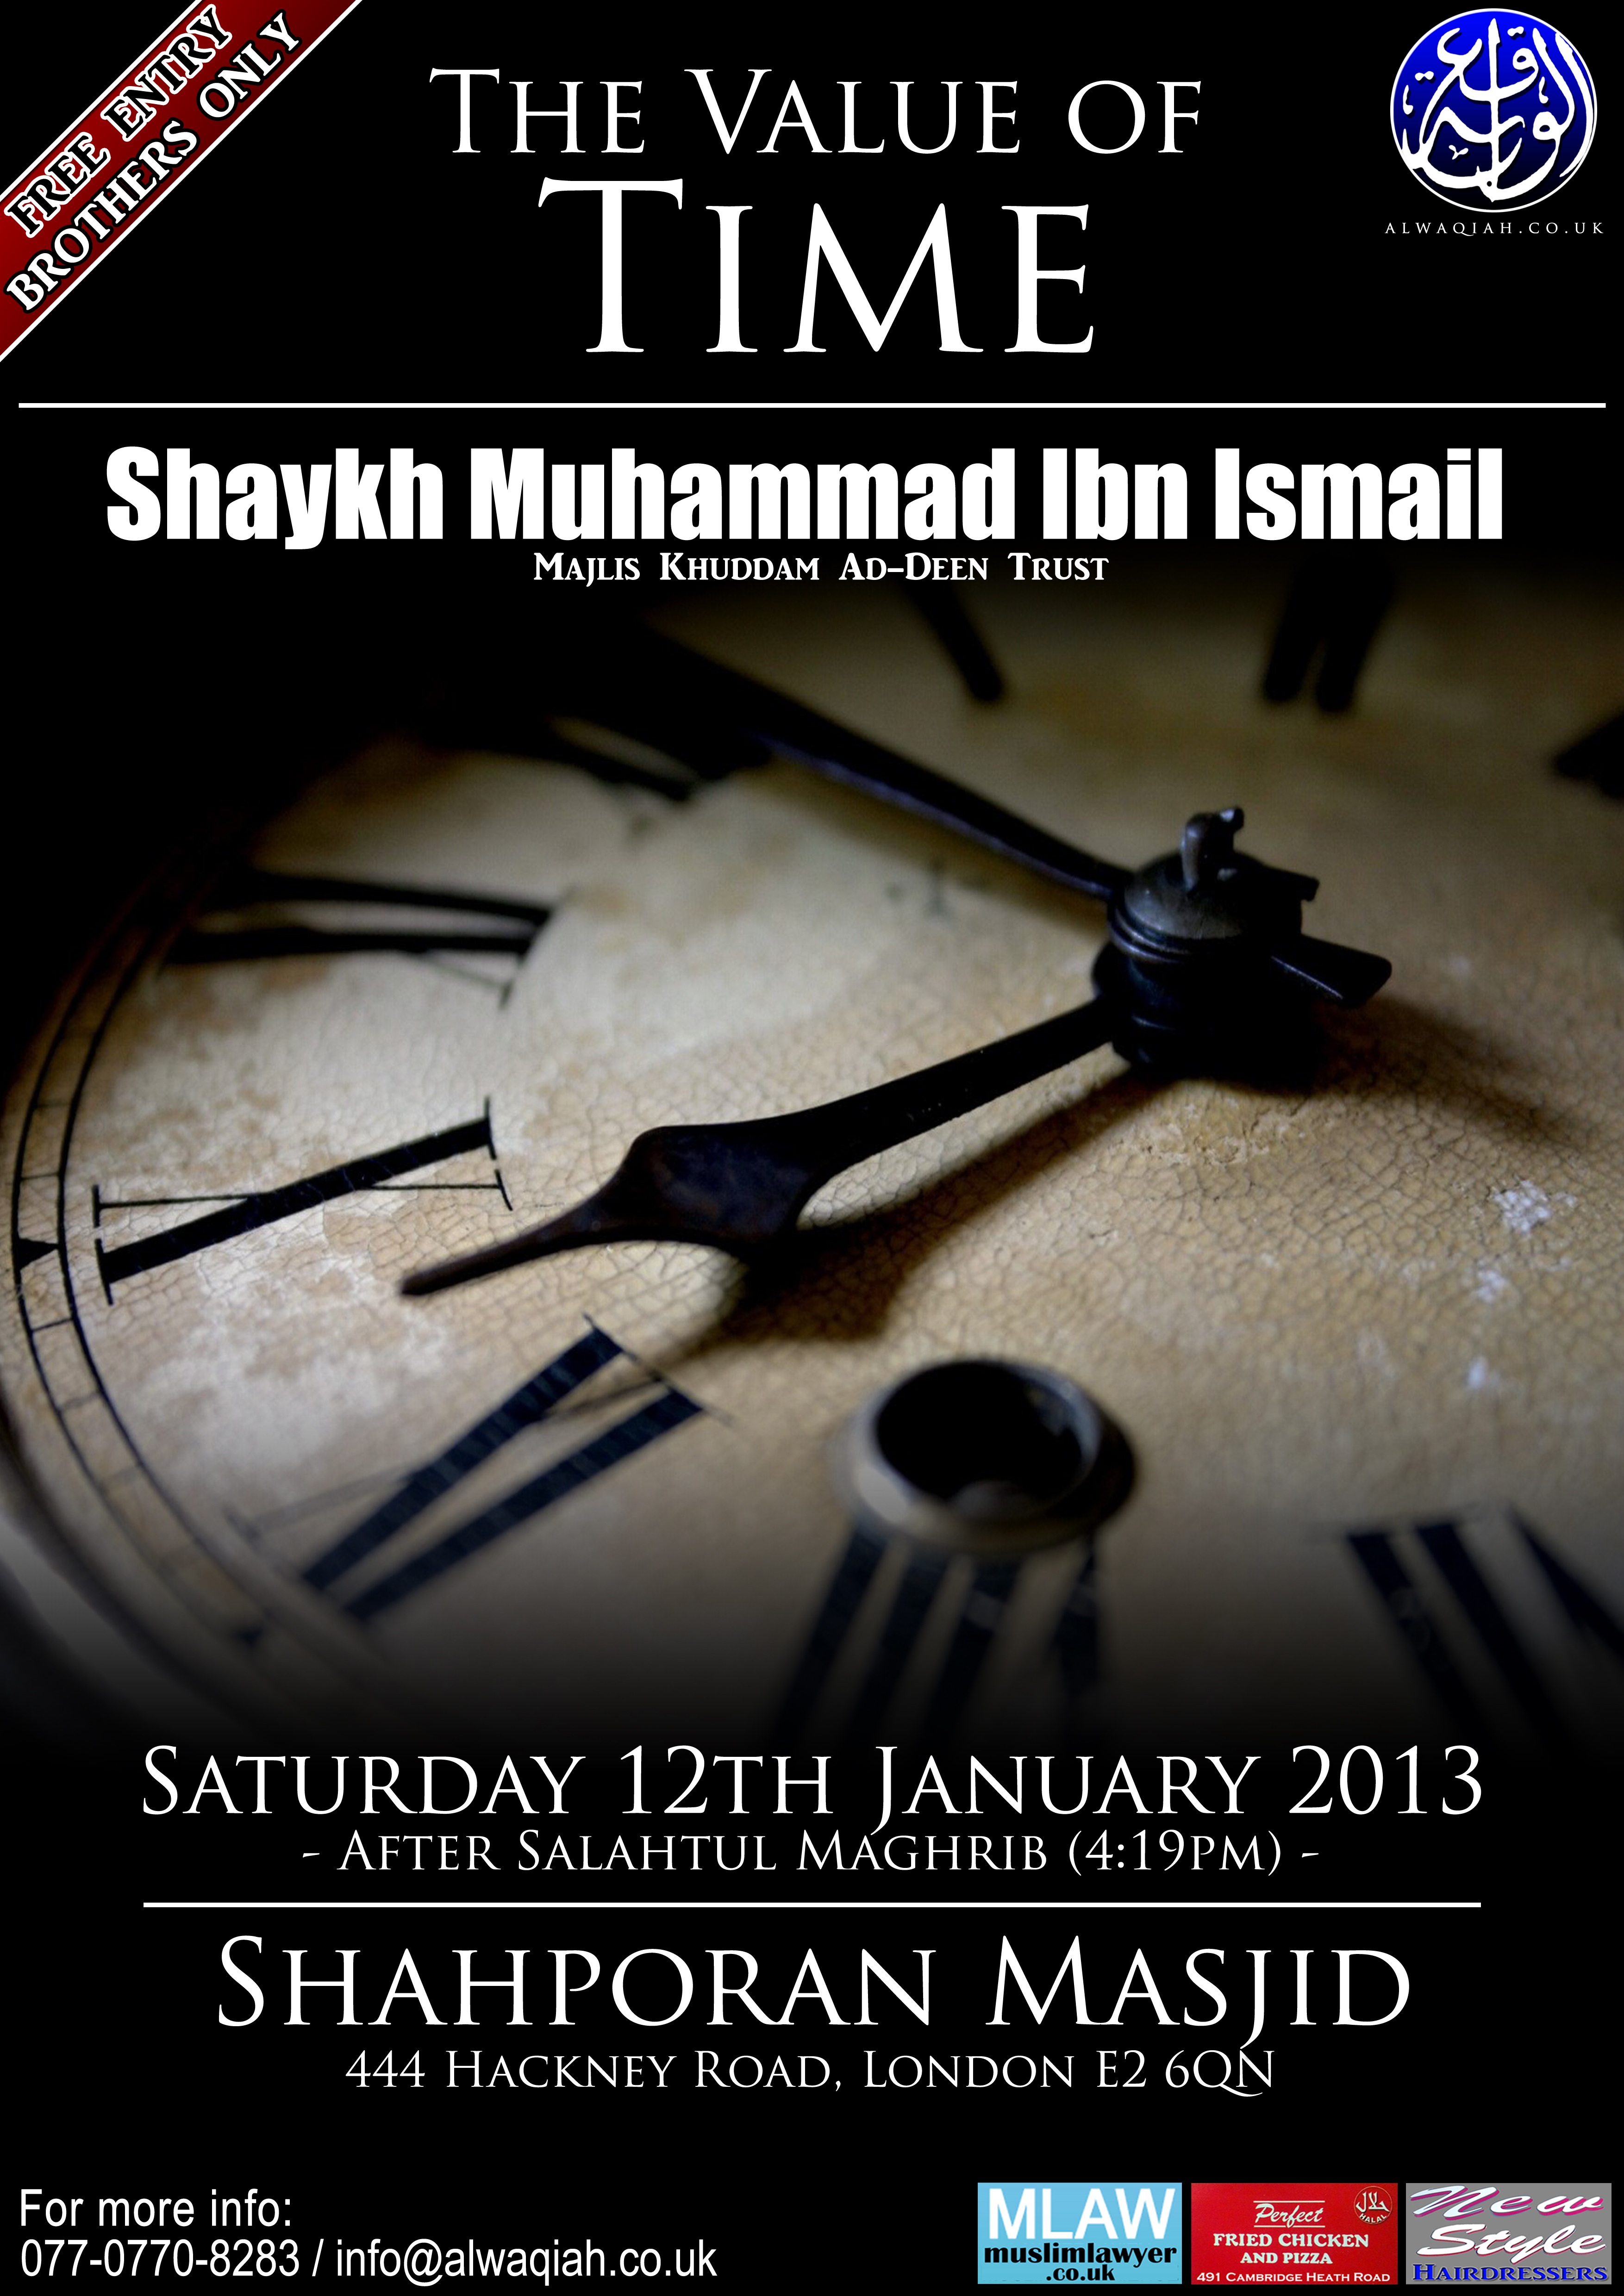 THE VALUE OF TIME | Shaykh Muhammad Ibn Ismail